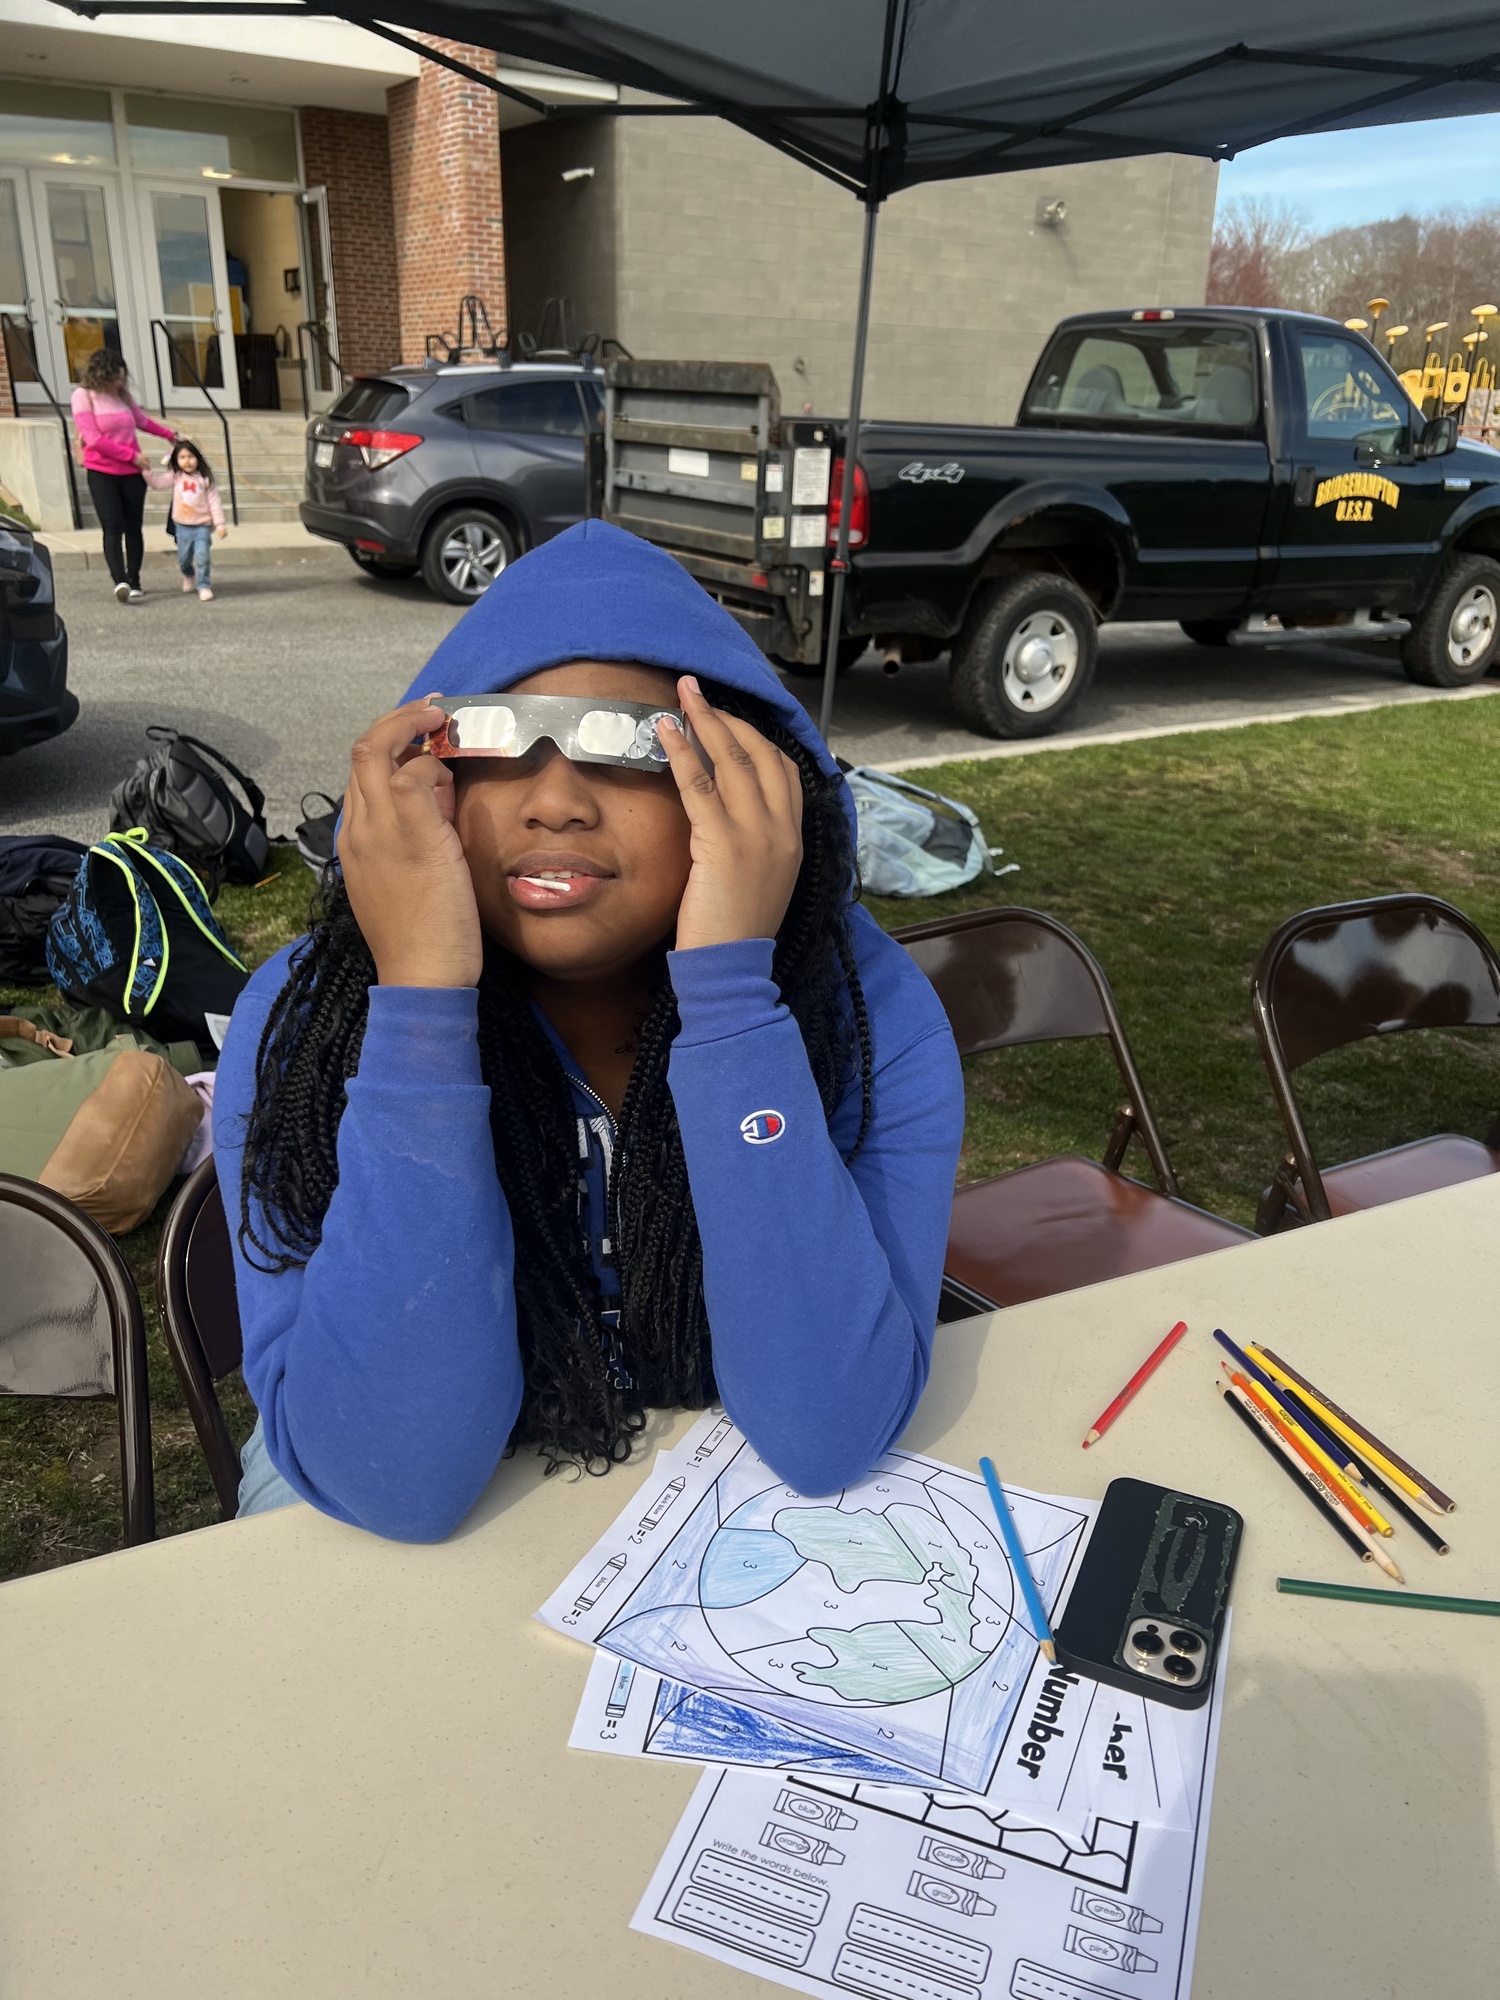 Bridgehampton Union Free School District and community members gathered for a showing of the solar eclipse on April 8. With the protection of eclipse glasses, everyone was able to witness the incredible event. Student Nickoya Patterson is ready. COURTESY BRIDGEHAMPTON SCHOOL DISTRICT